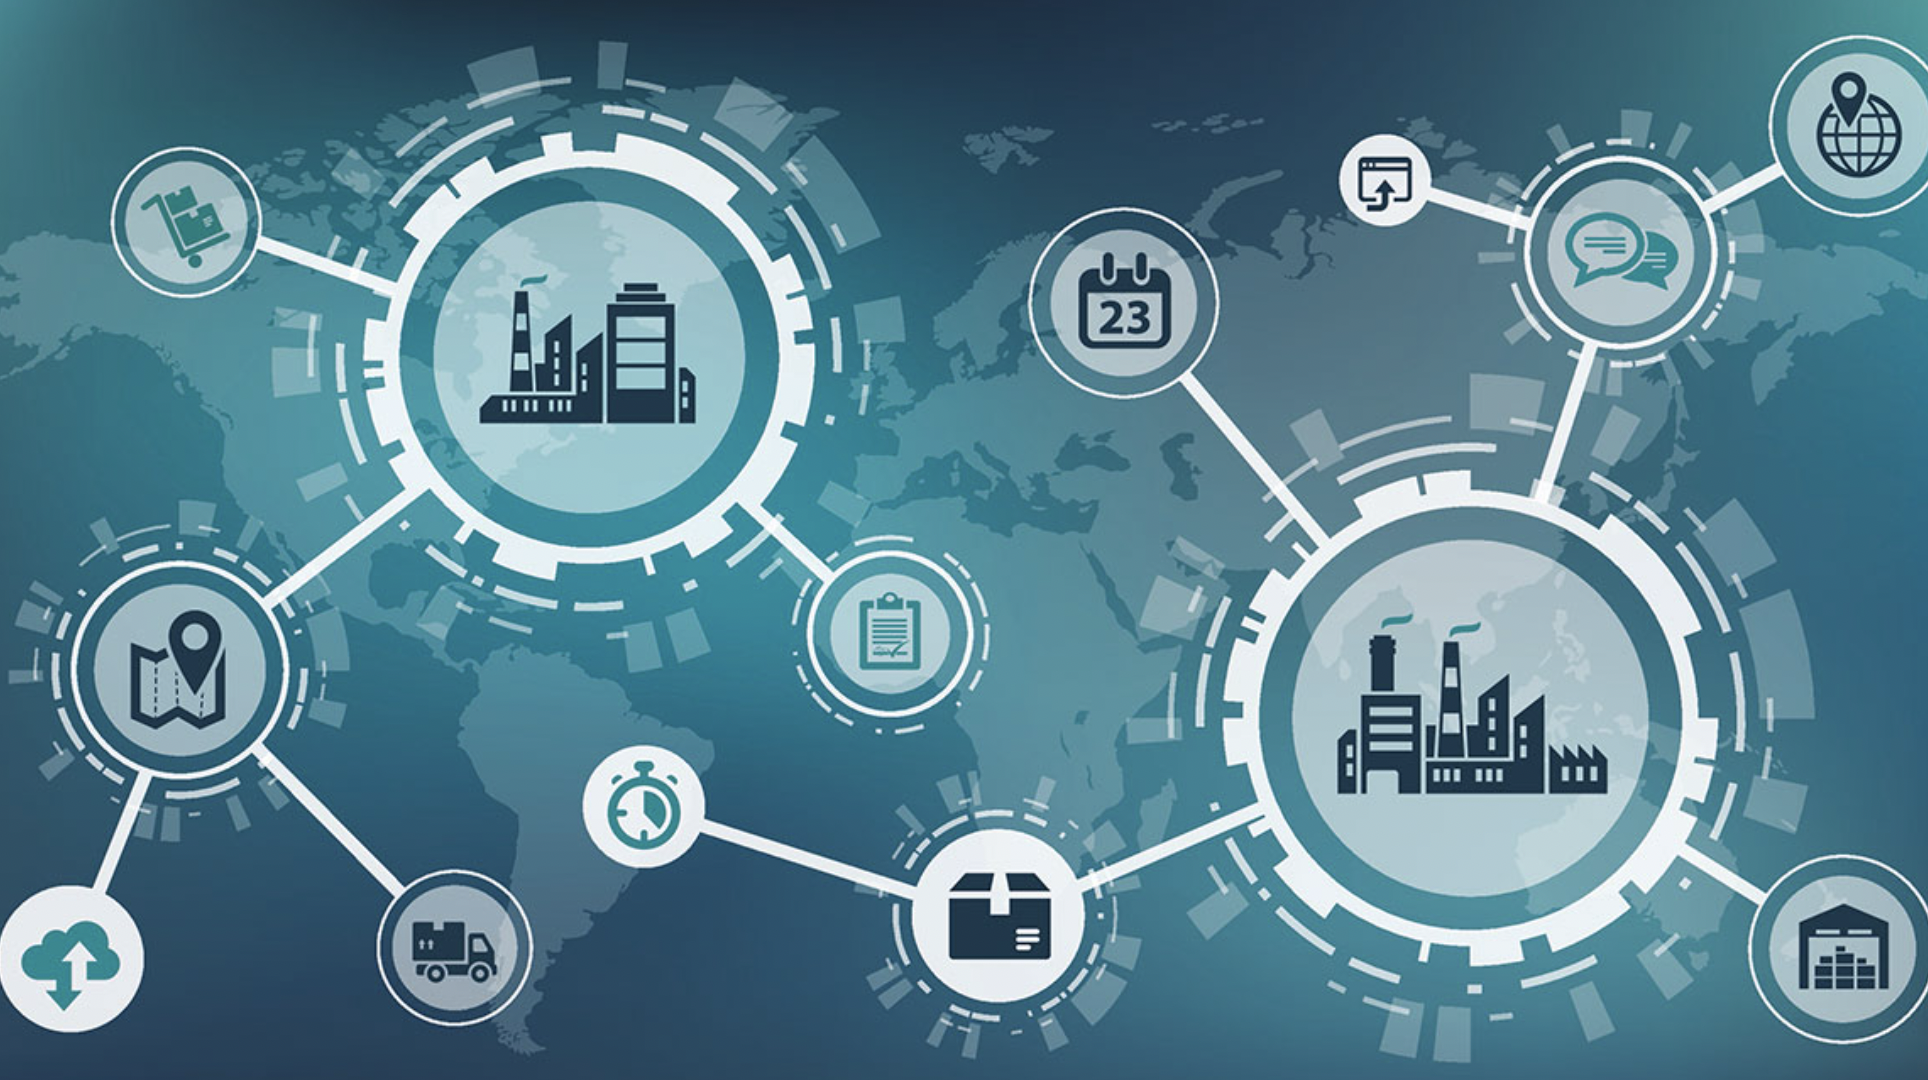 What are the major supply chain issues?